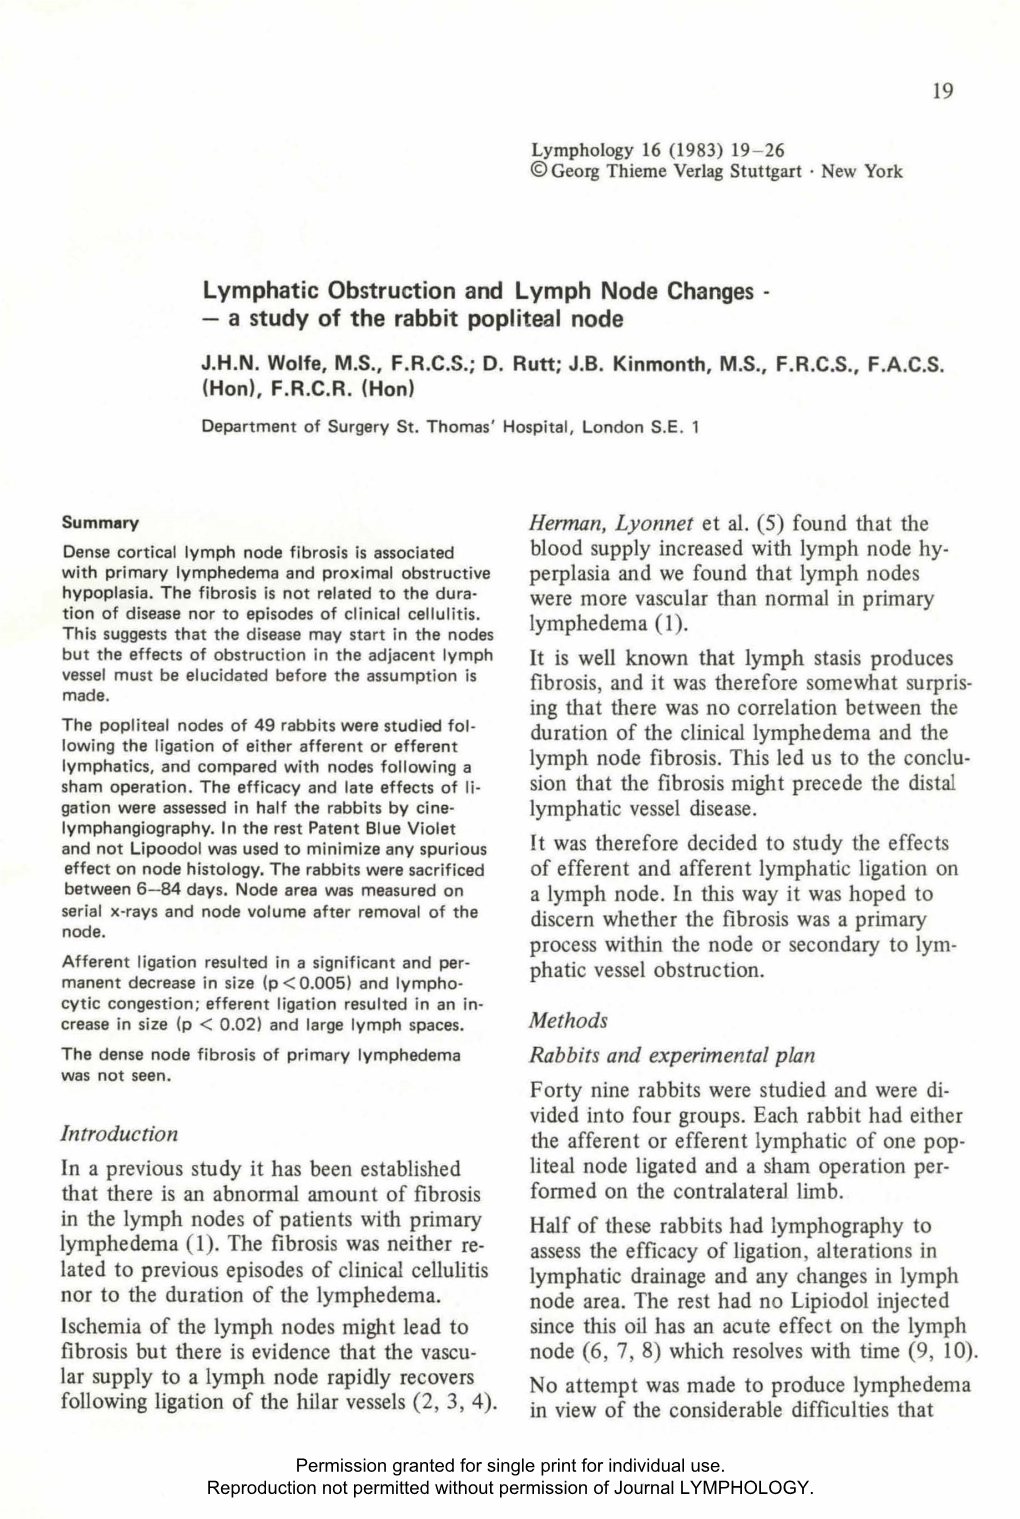 19 Lymphatic Obstruction and Lymph Node Changes